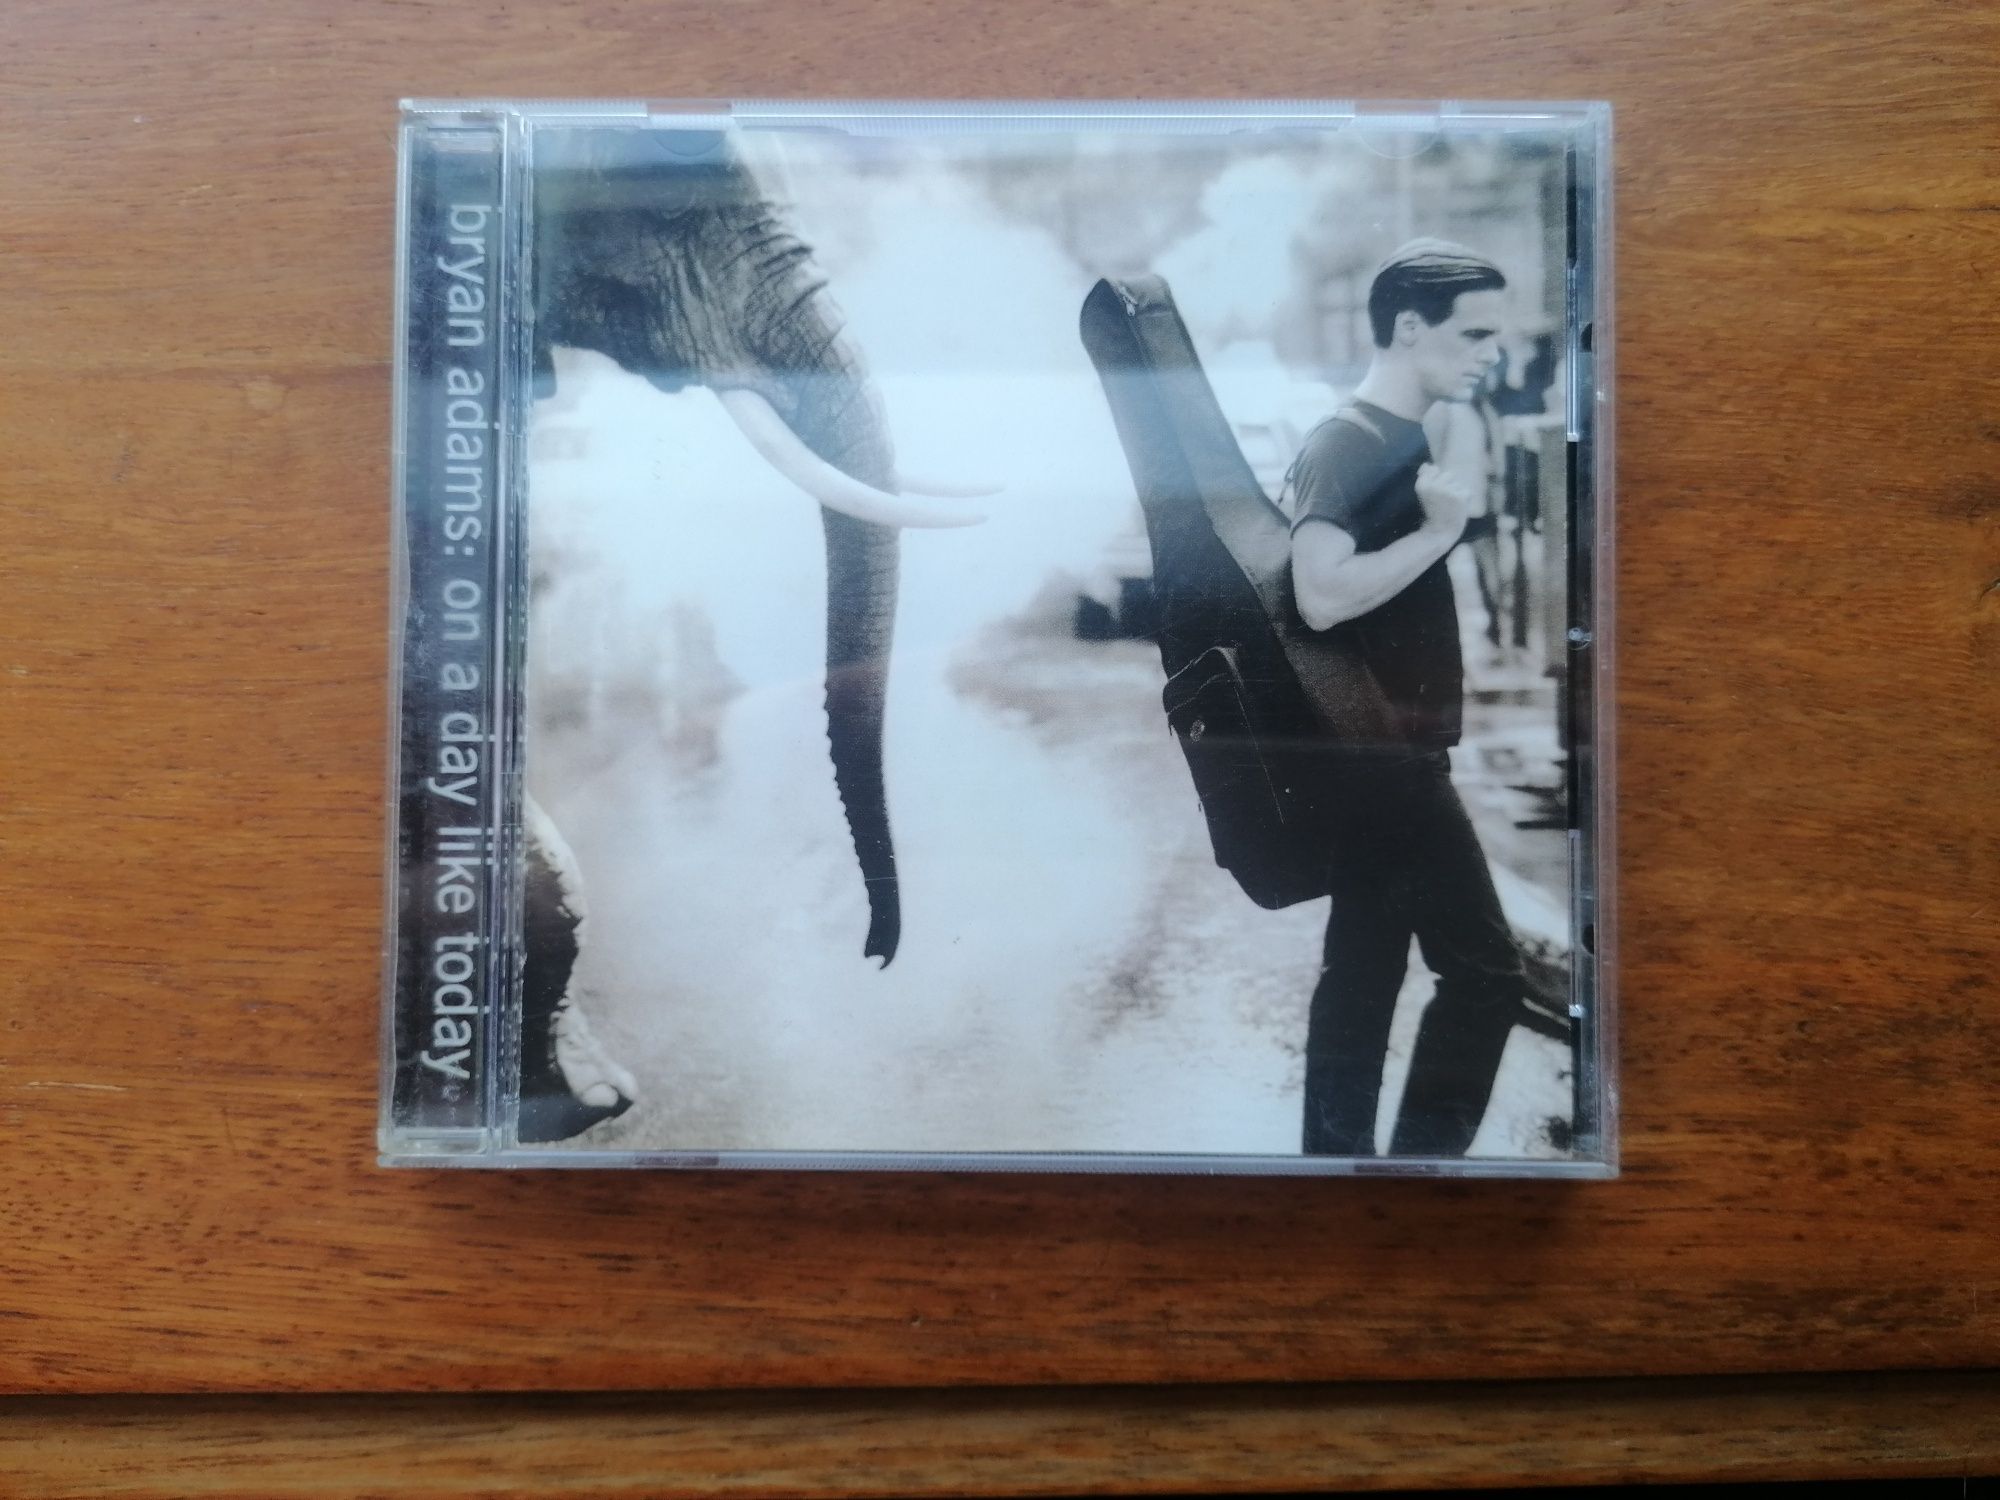 CD Bryan Adams "On a day like today"